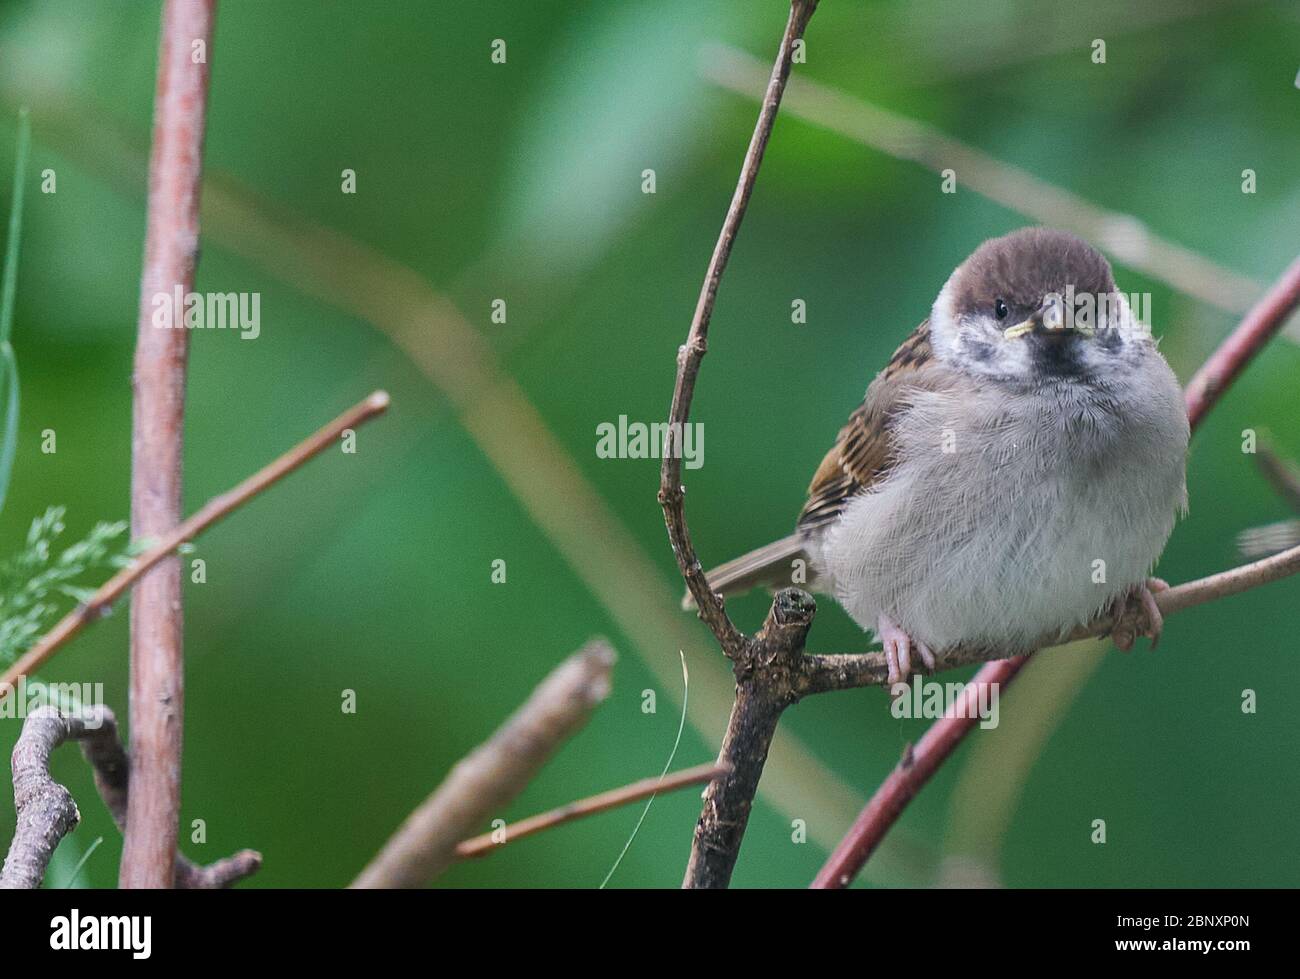 Marktoberdorf, Germany, 14th of May, 2020. Young baby sparrows feeding. © Peter Schatz / Alamy Stock Photos Stock Photo